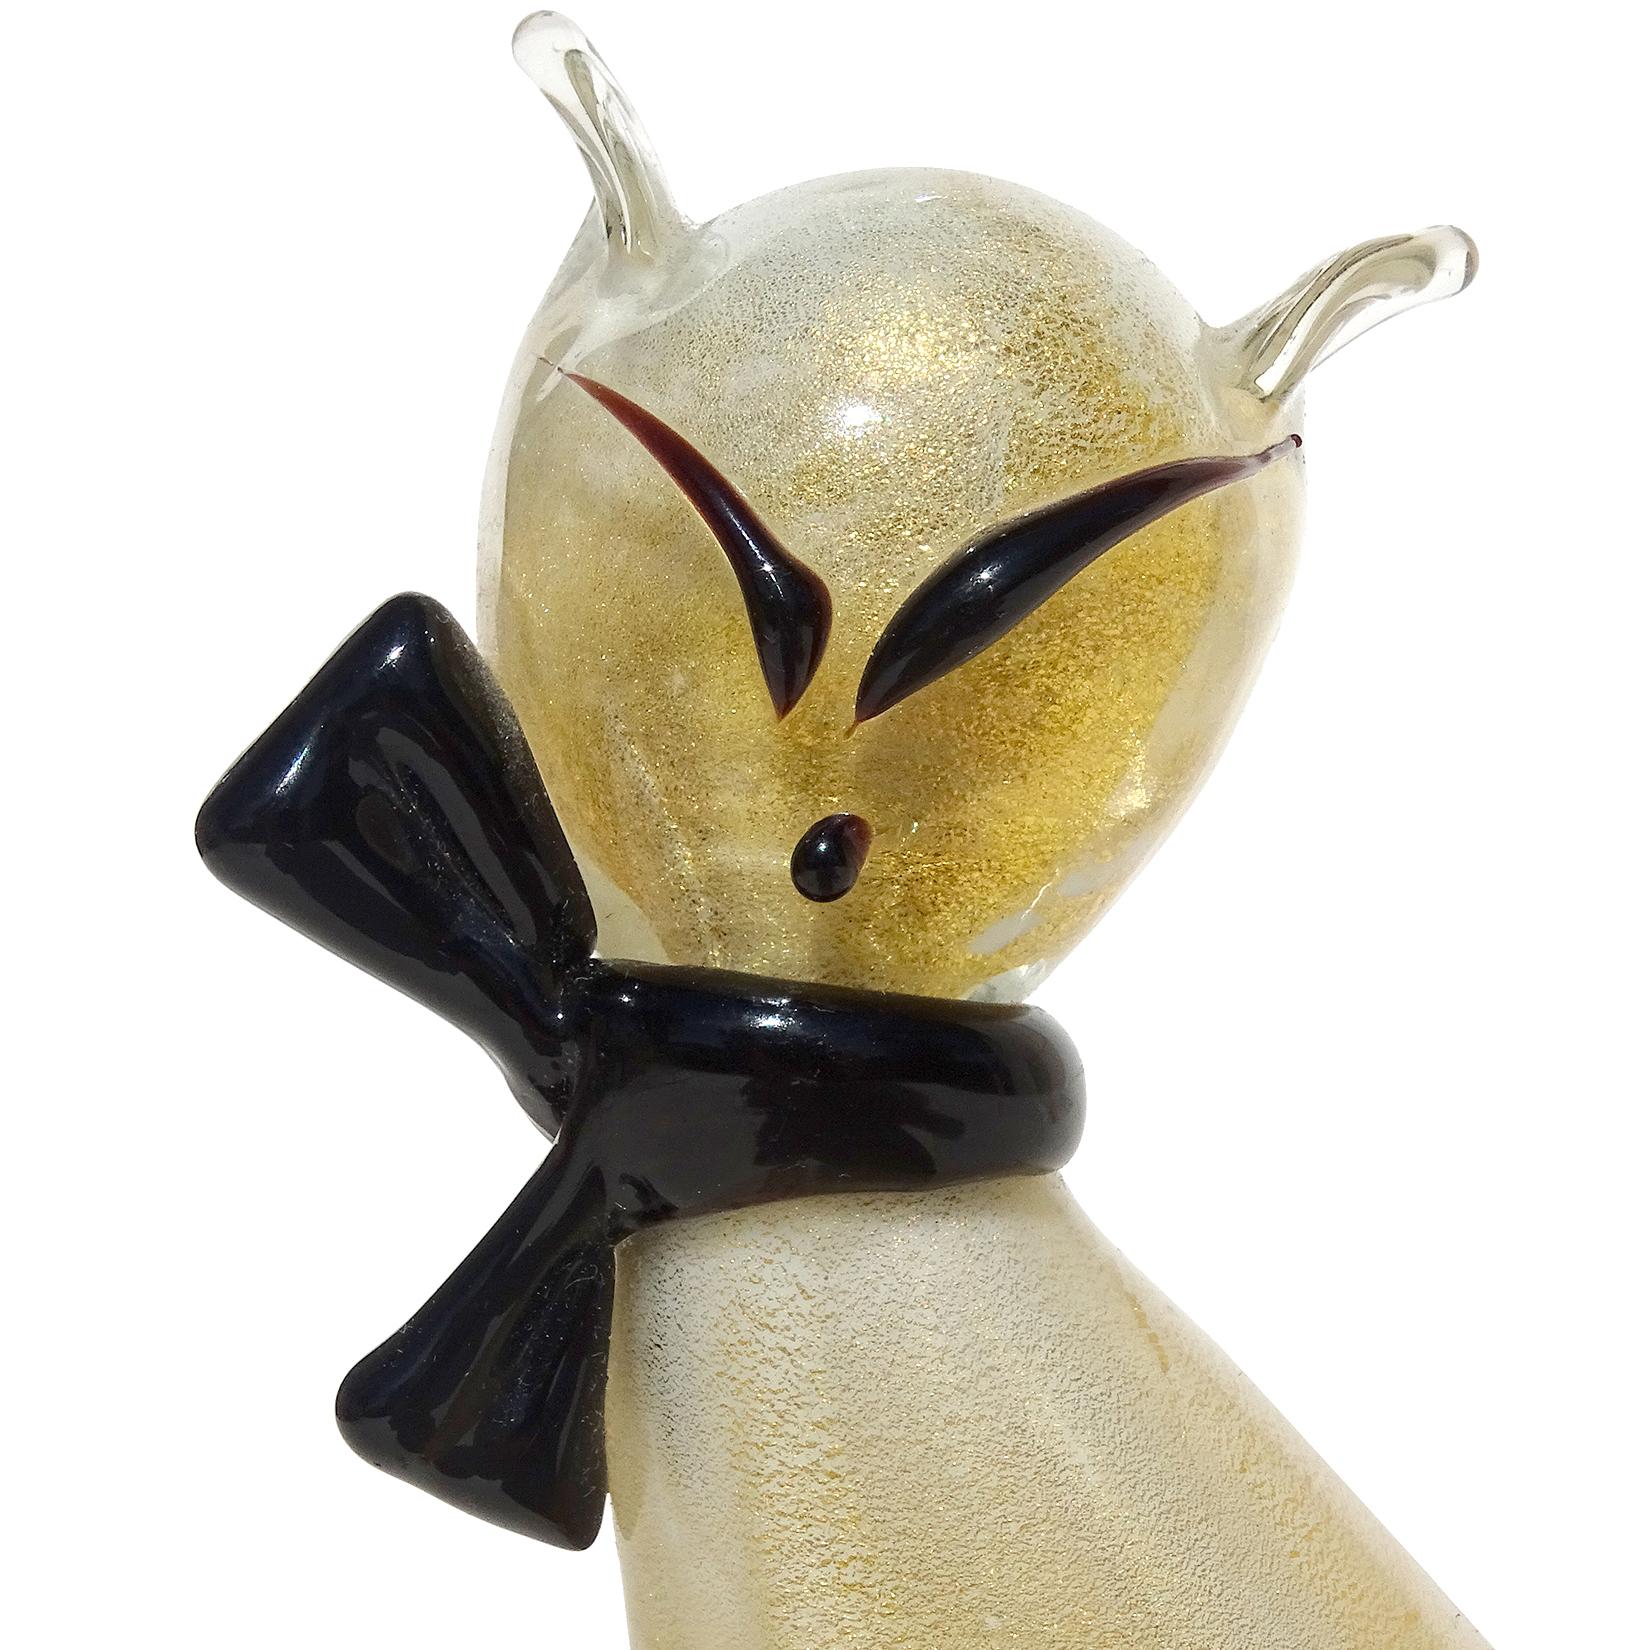 Beautiful vintage Murano hand blown clear over gold flecks Italian art glass kitty cat sculpture. The figure is profusely covered in heavy gold leaf, with black bow around face details. It still retains an original 